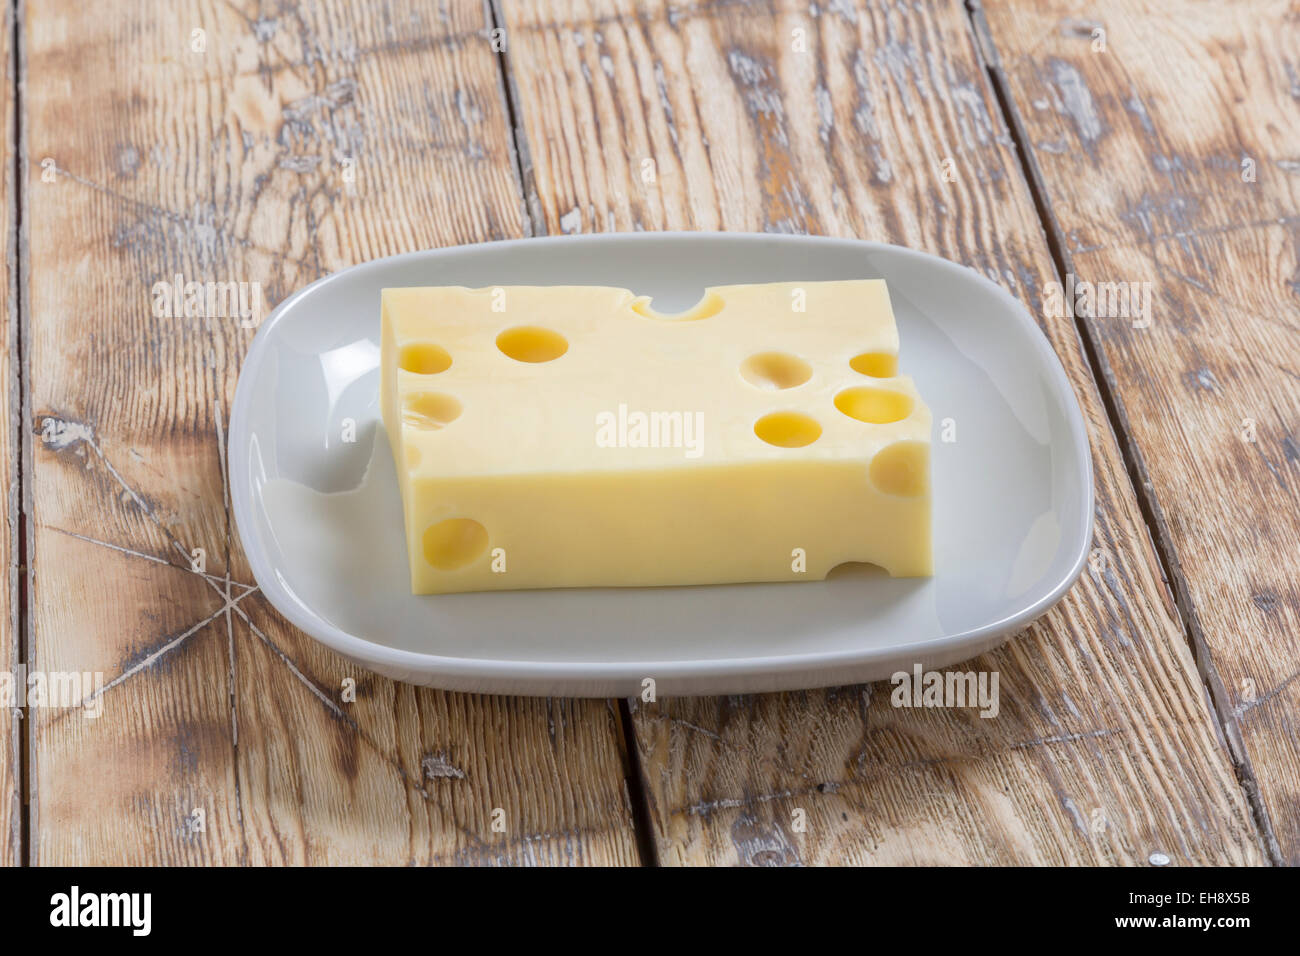 Piece of Cheese on rustic wooden table Stock Photo